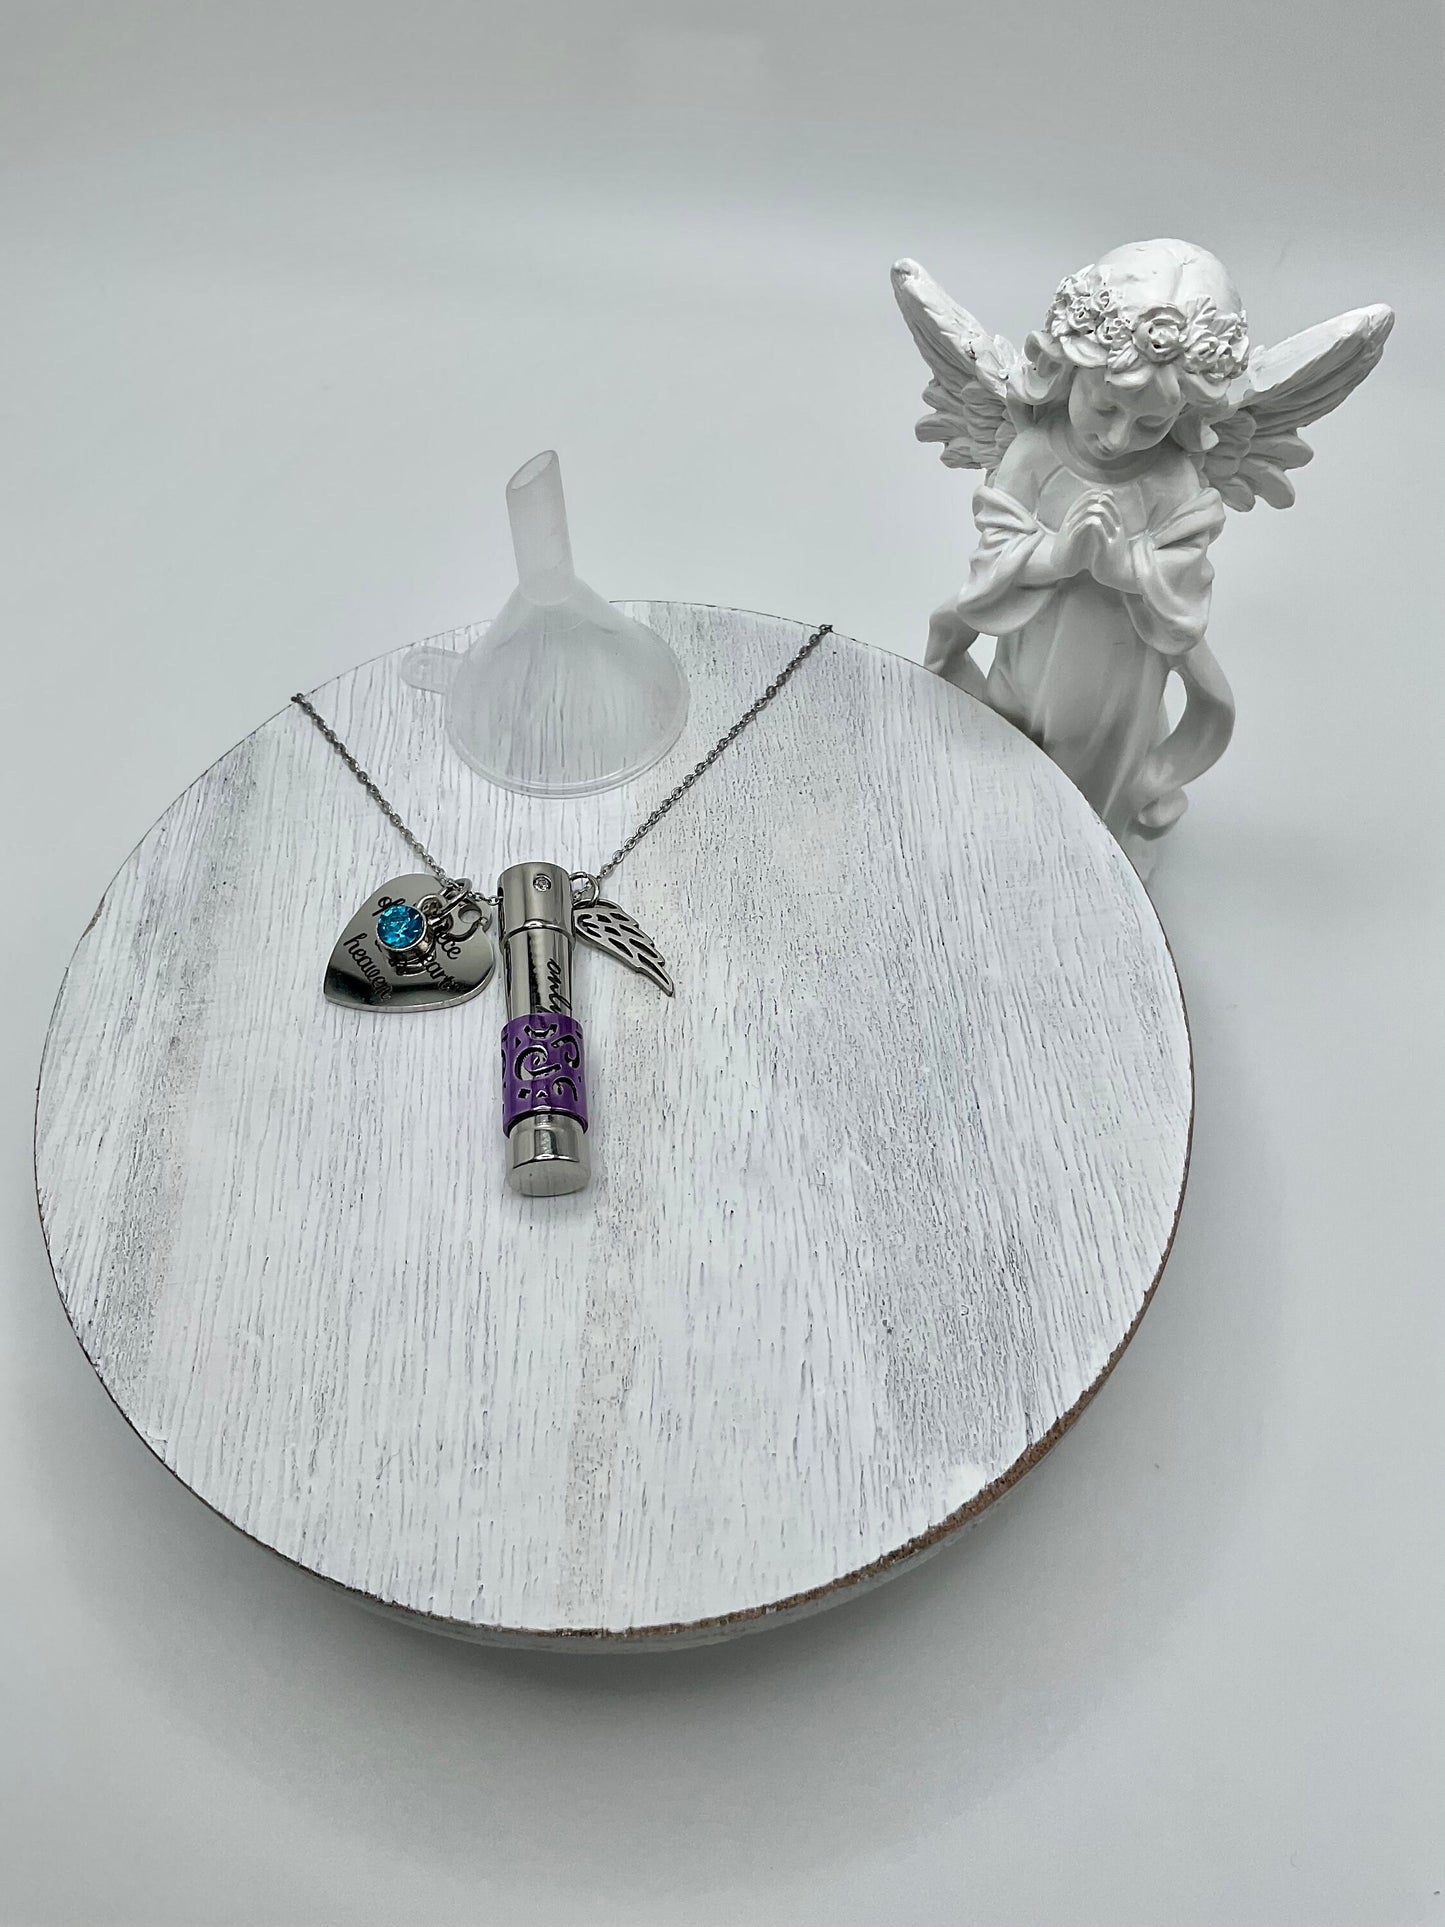 Purple Ash Urn Necklace Charm Birthstone with Personalization for Male or Female Funeral Memorial